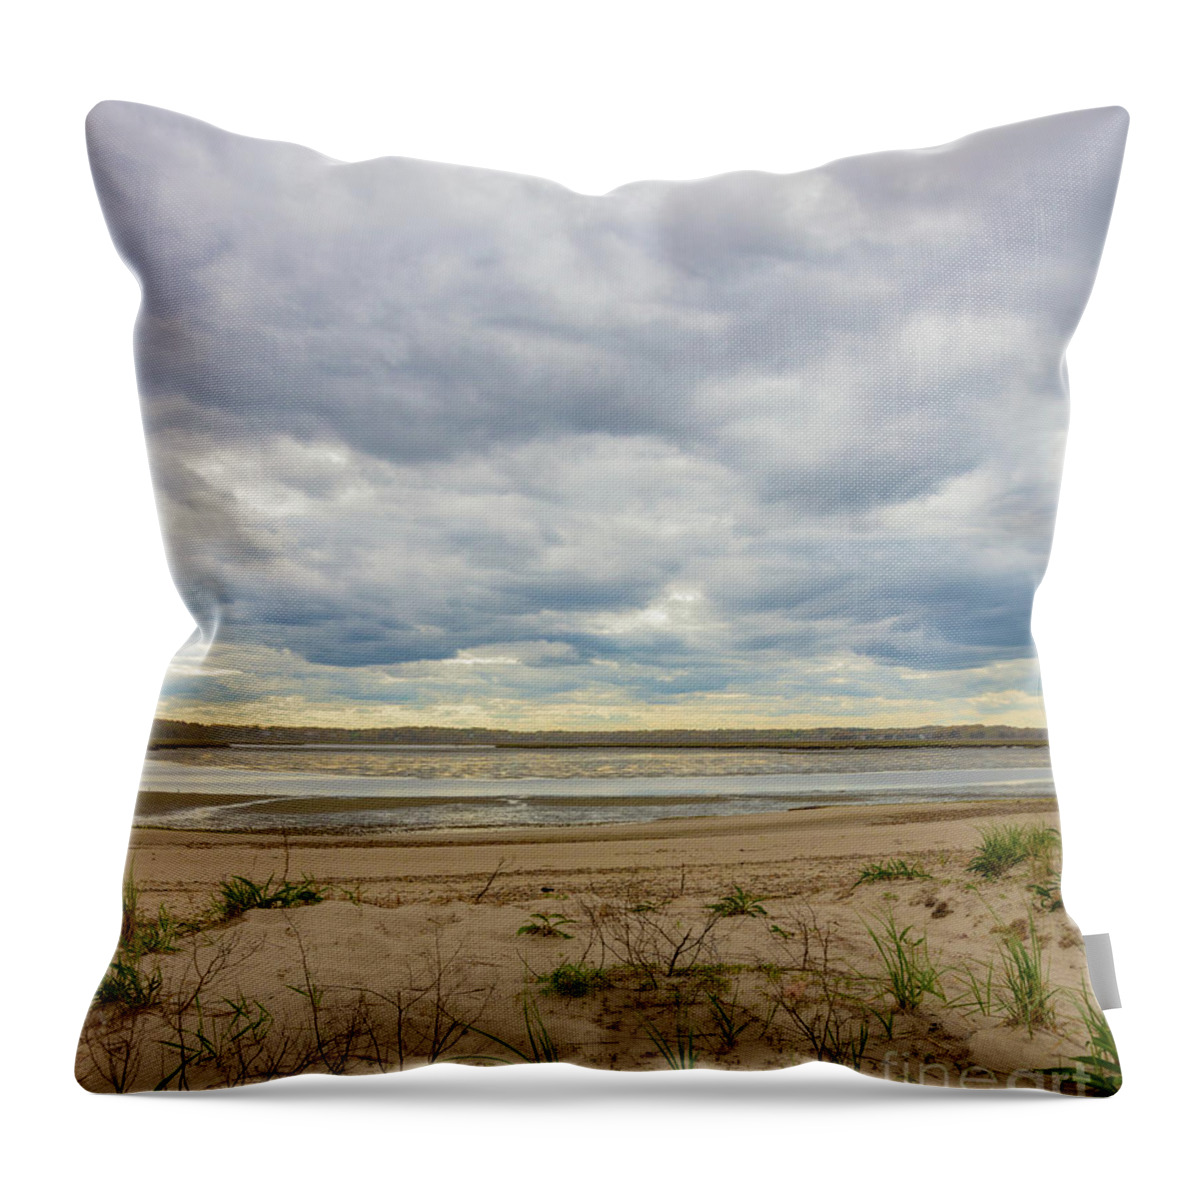 Duxbury Gold Throw Pillow featuring the photograph Duxbury Gold by Michelle Constantine